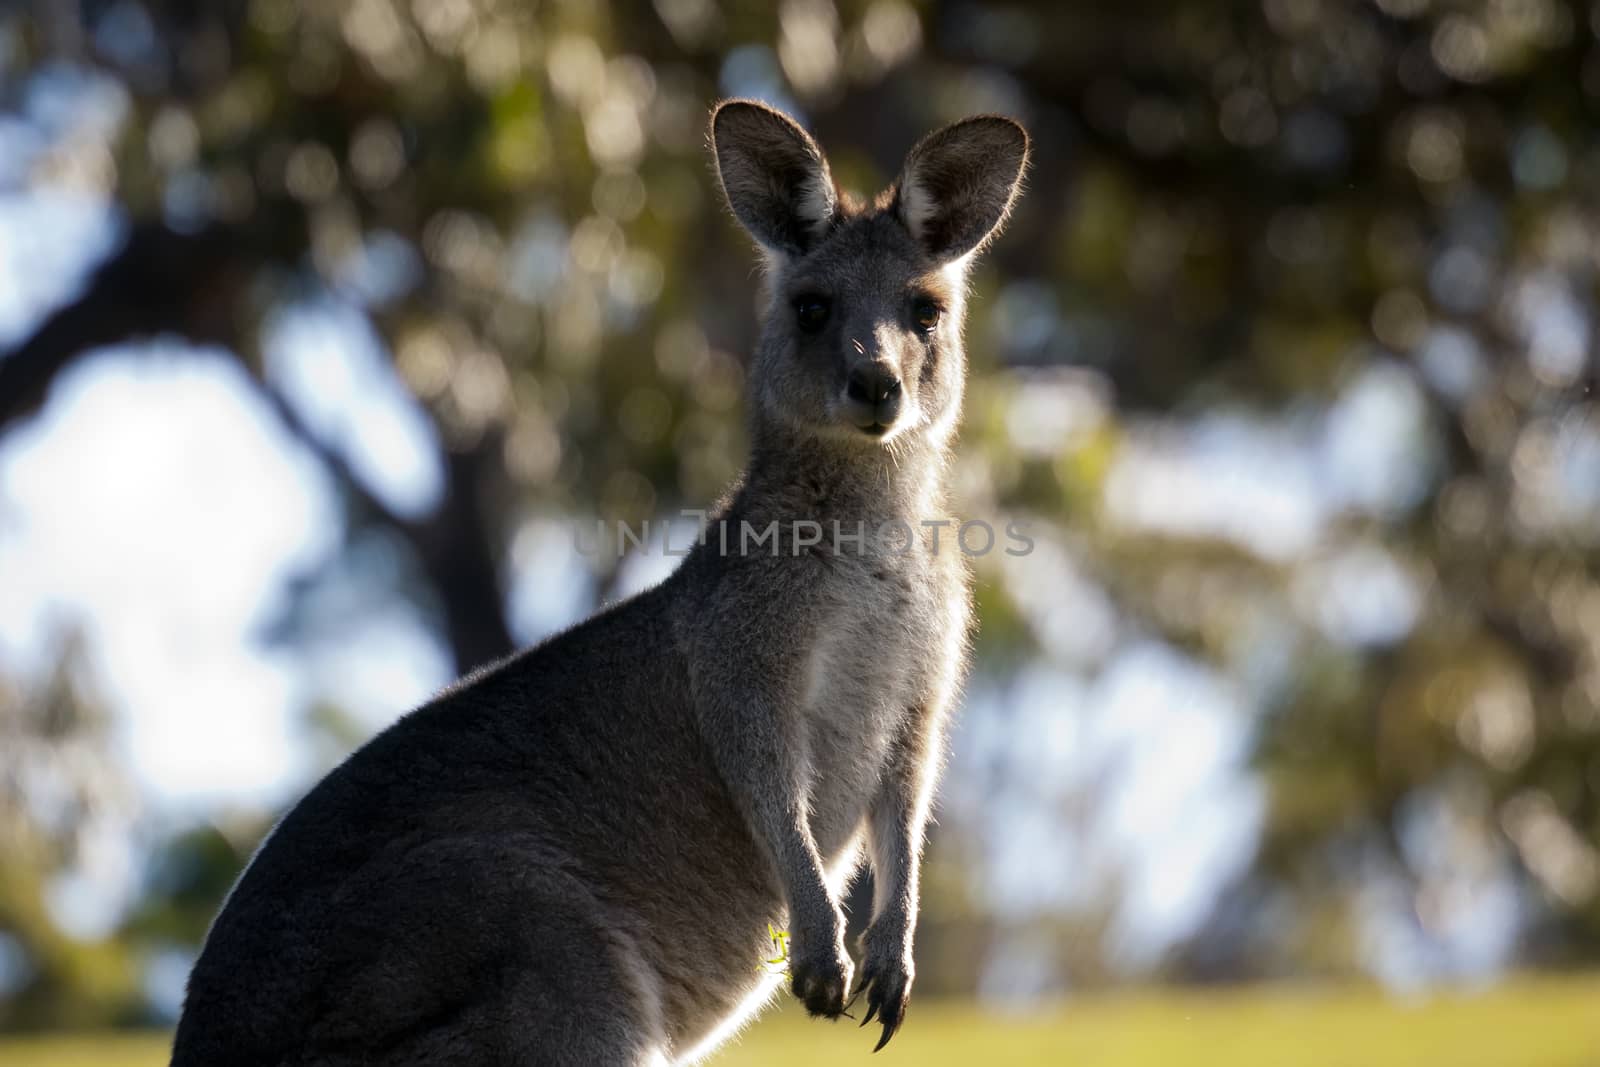 Kangaroo in a sunny clearing with blurred background by definitearts